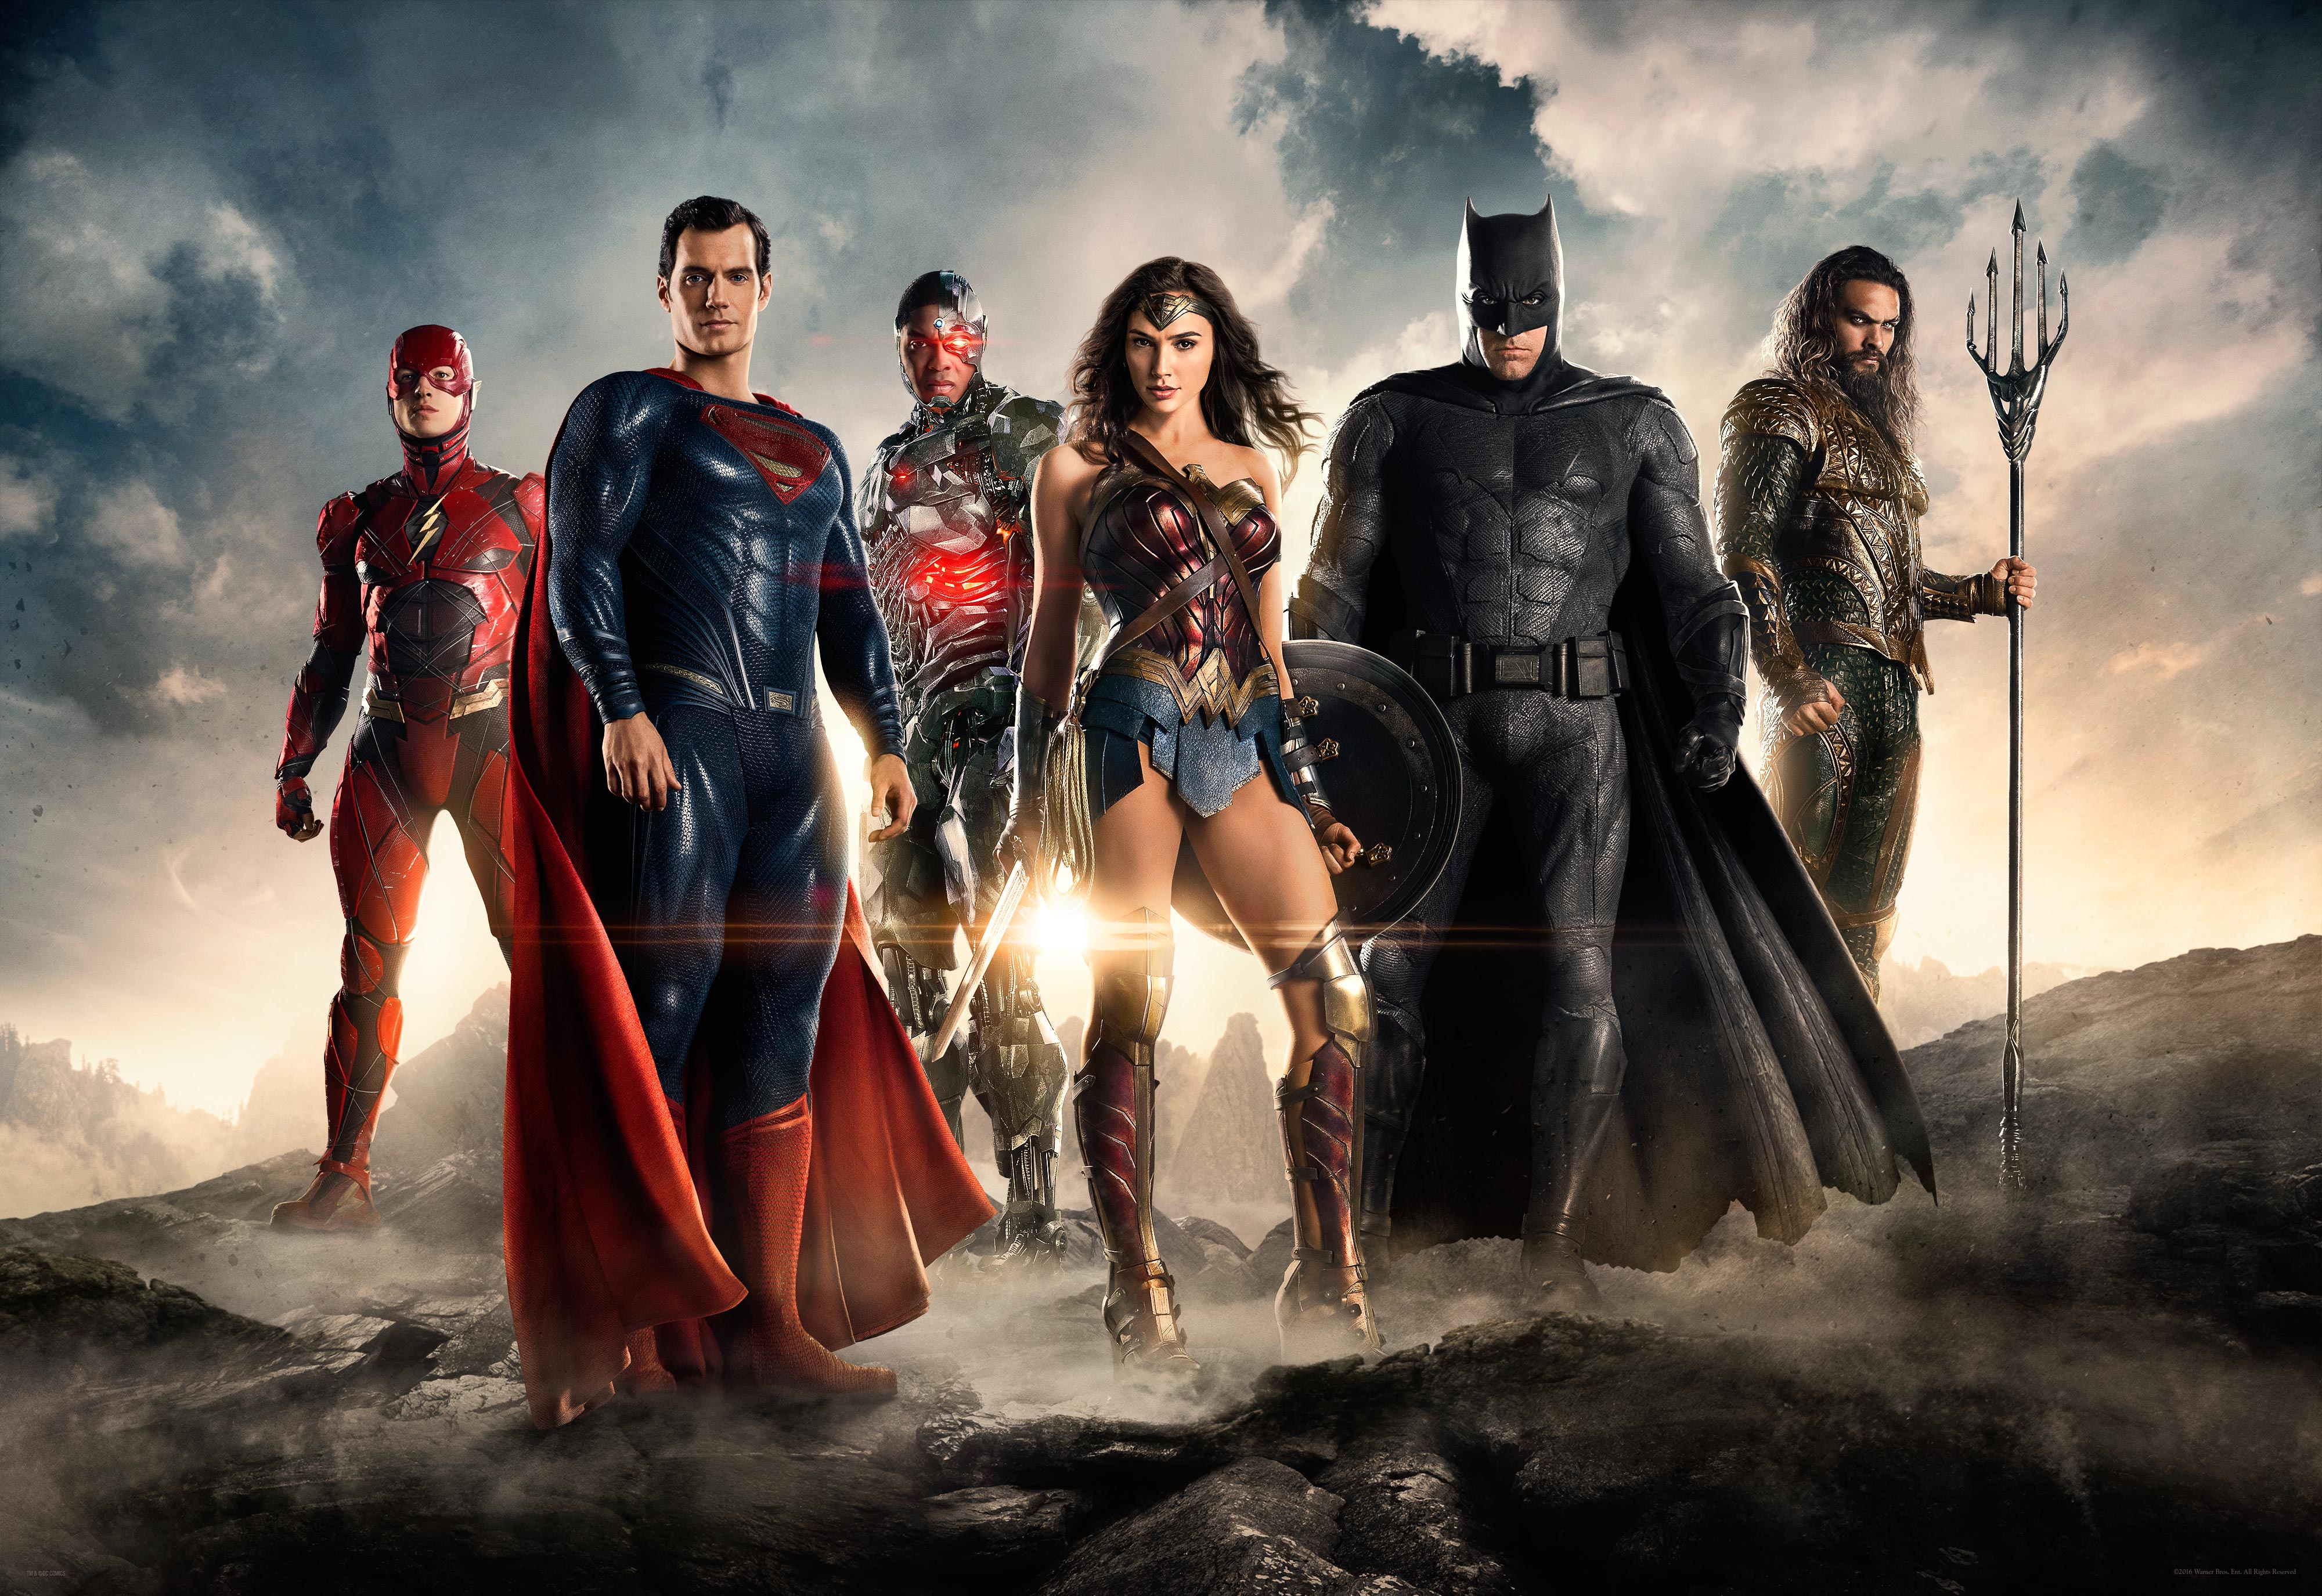 Justice League Movie Wallpaper Free Justice League Movie Background